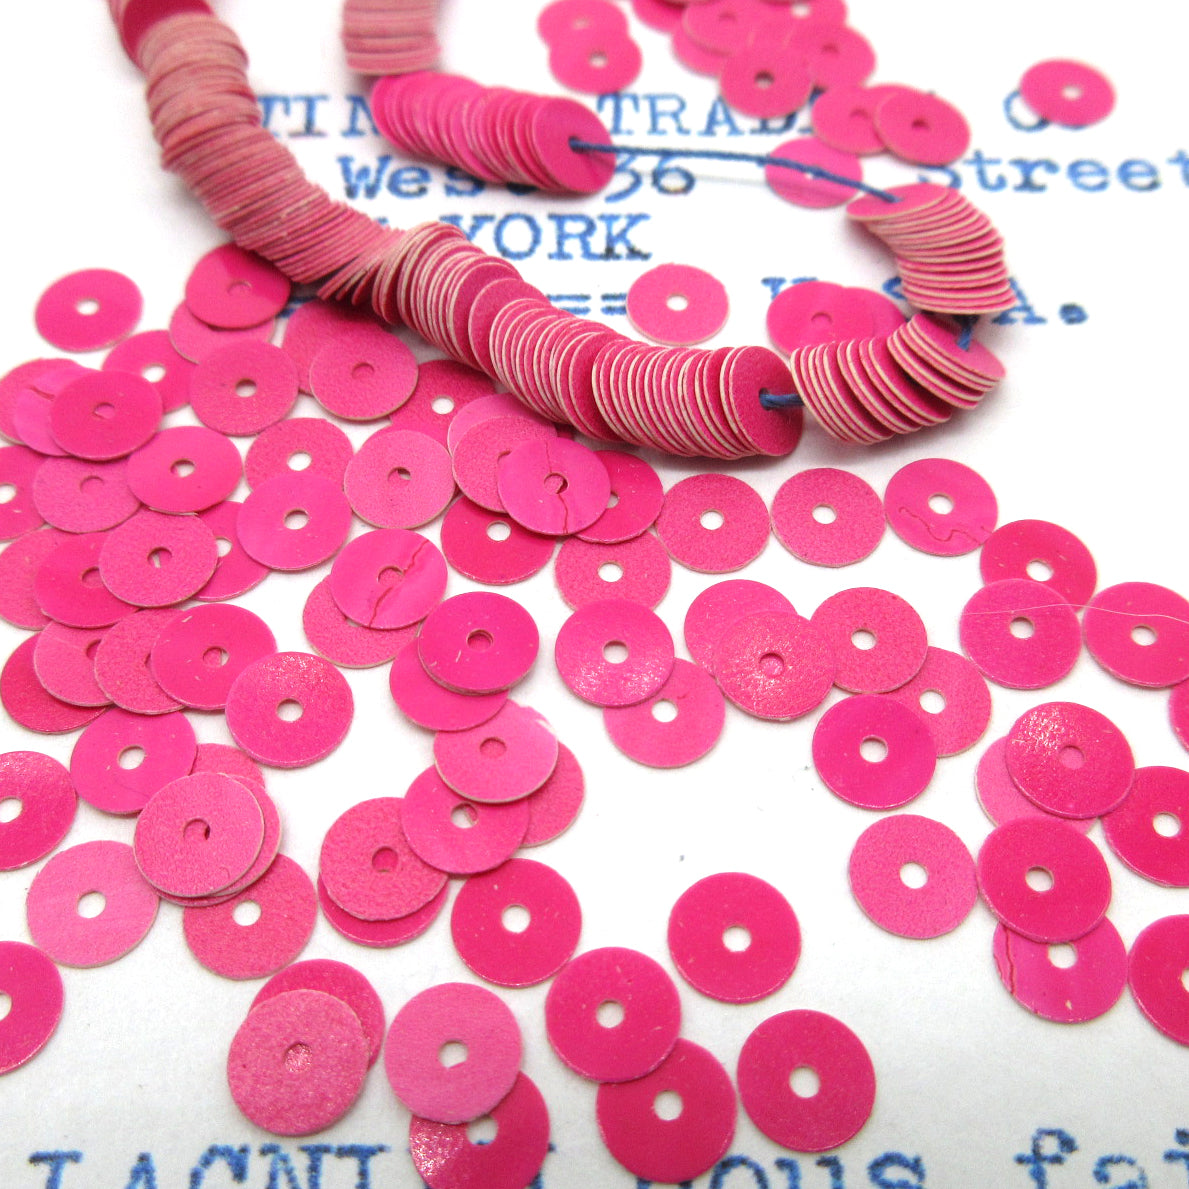 Hot Pink and Blue Flat Sequins 1 Strand 1000 Pieces